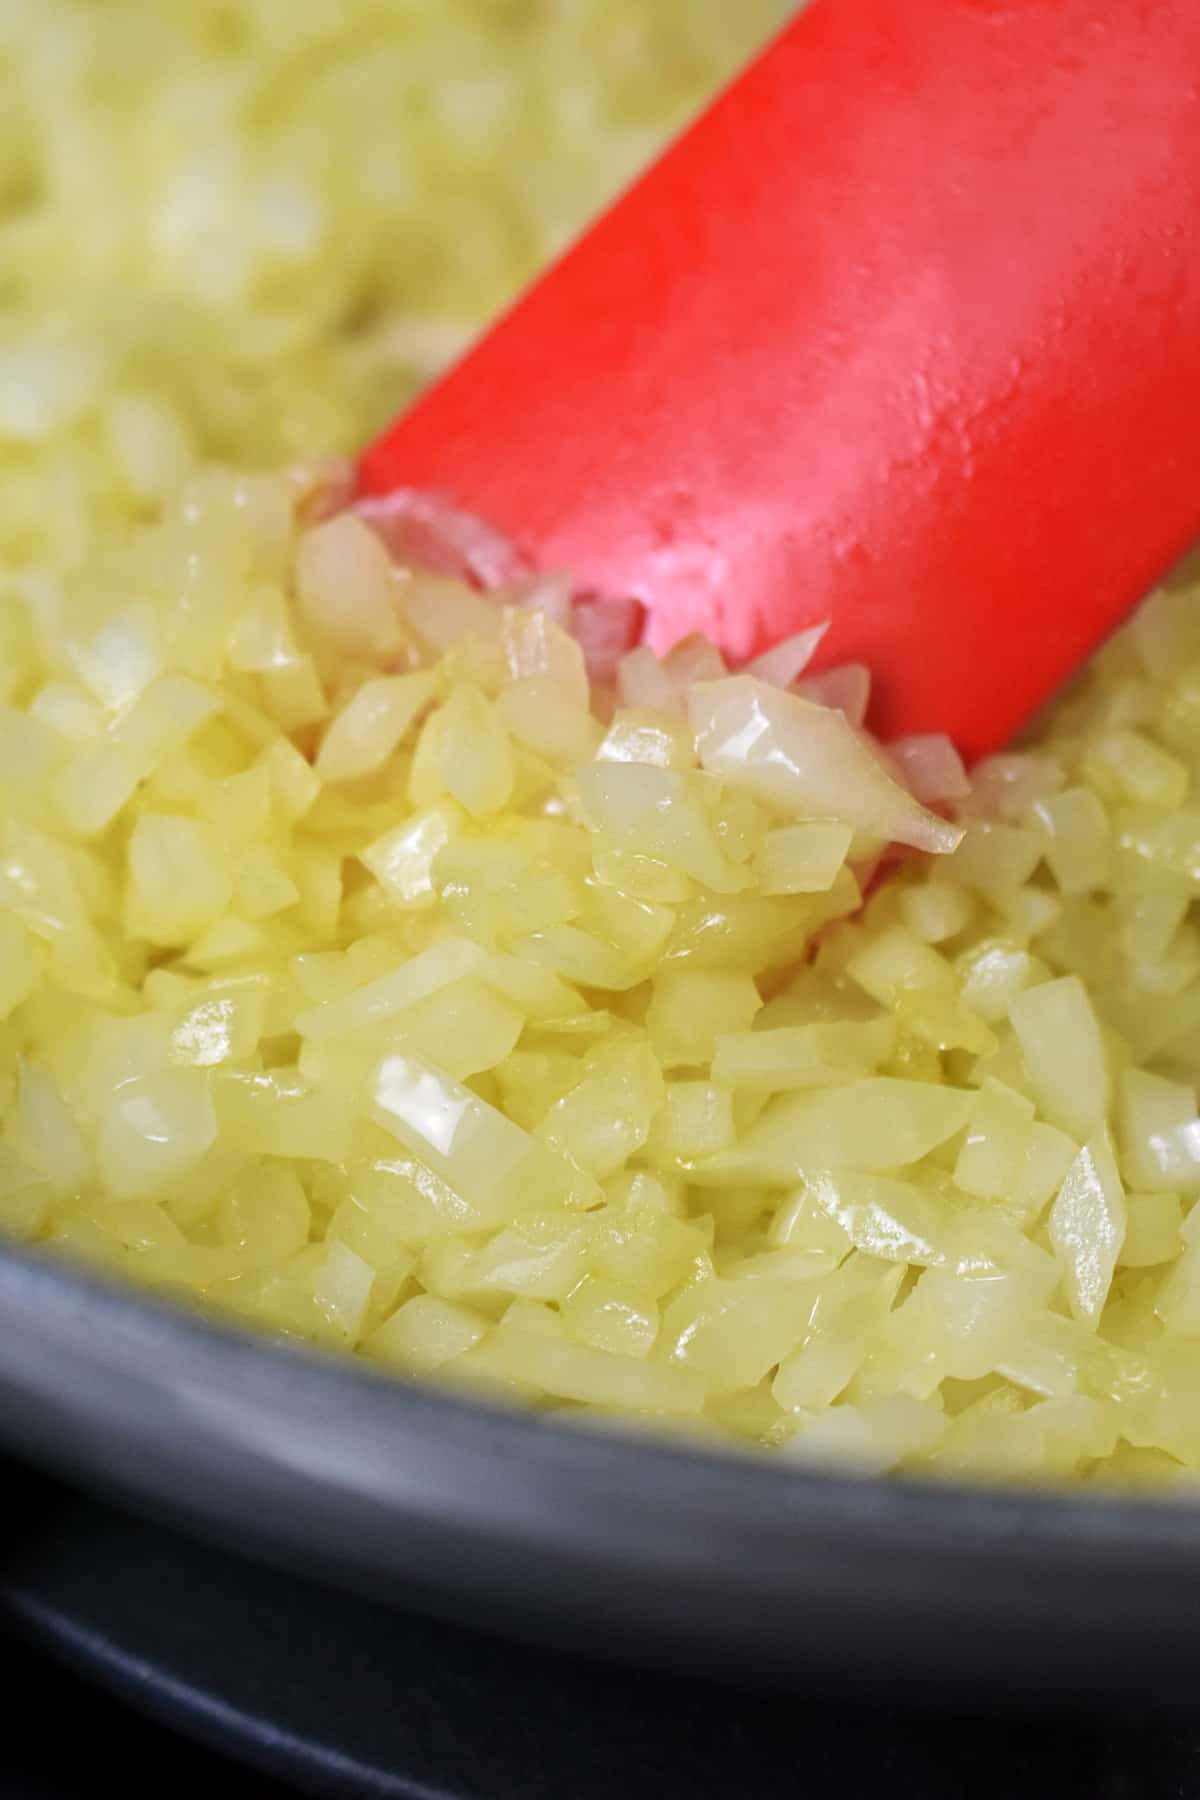 A red silicone spatula is pushing some softened sautéed chopped onions in a gray enamel cast iron skillet.